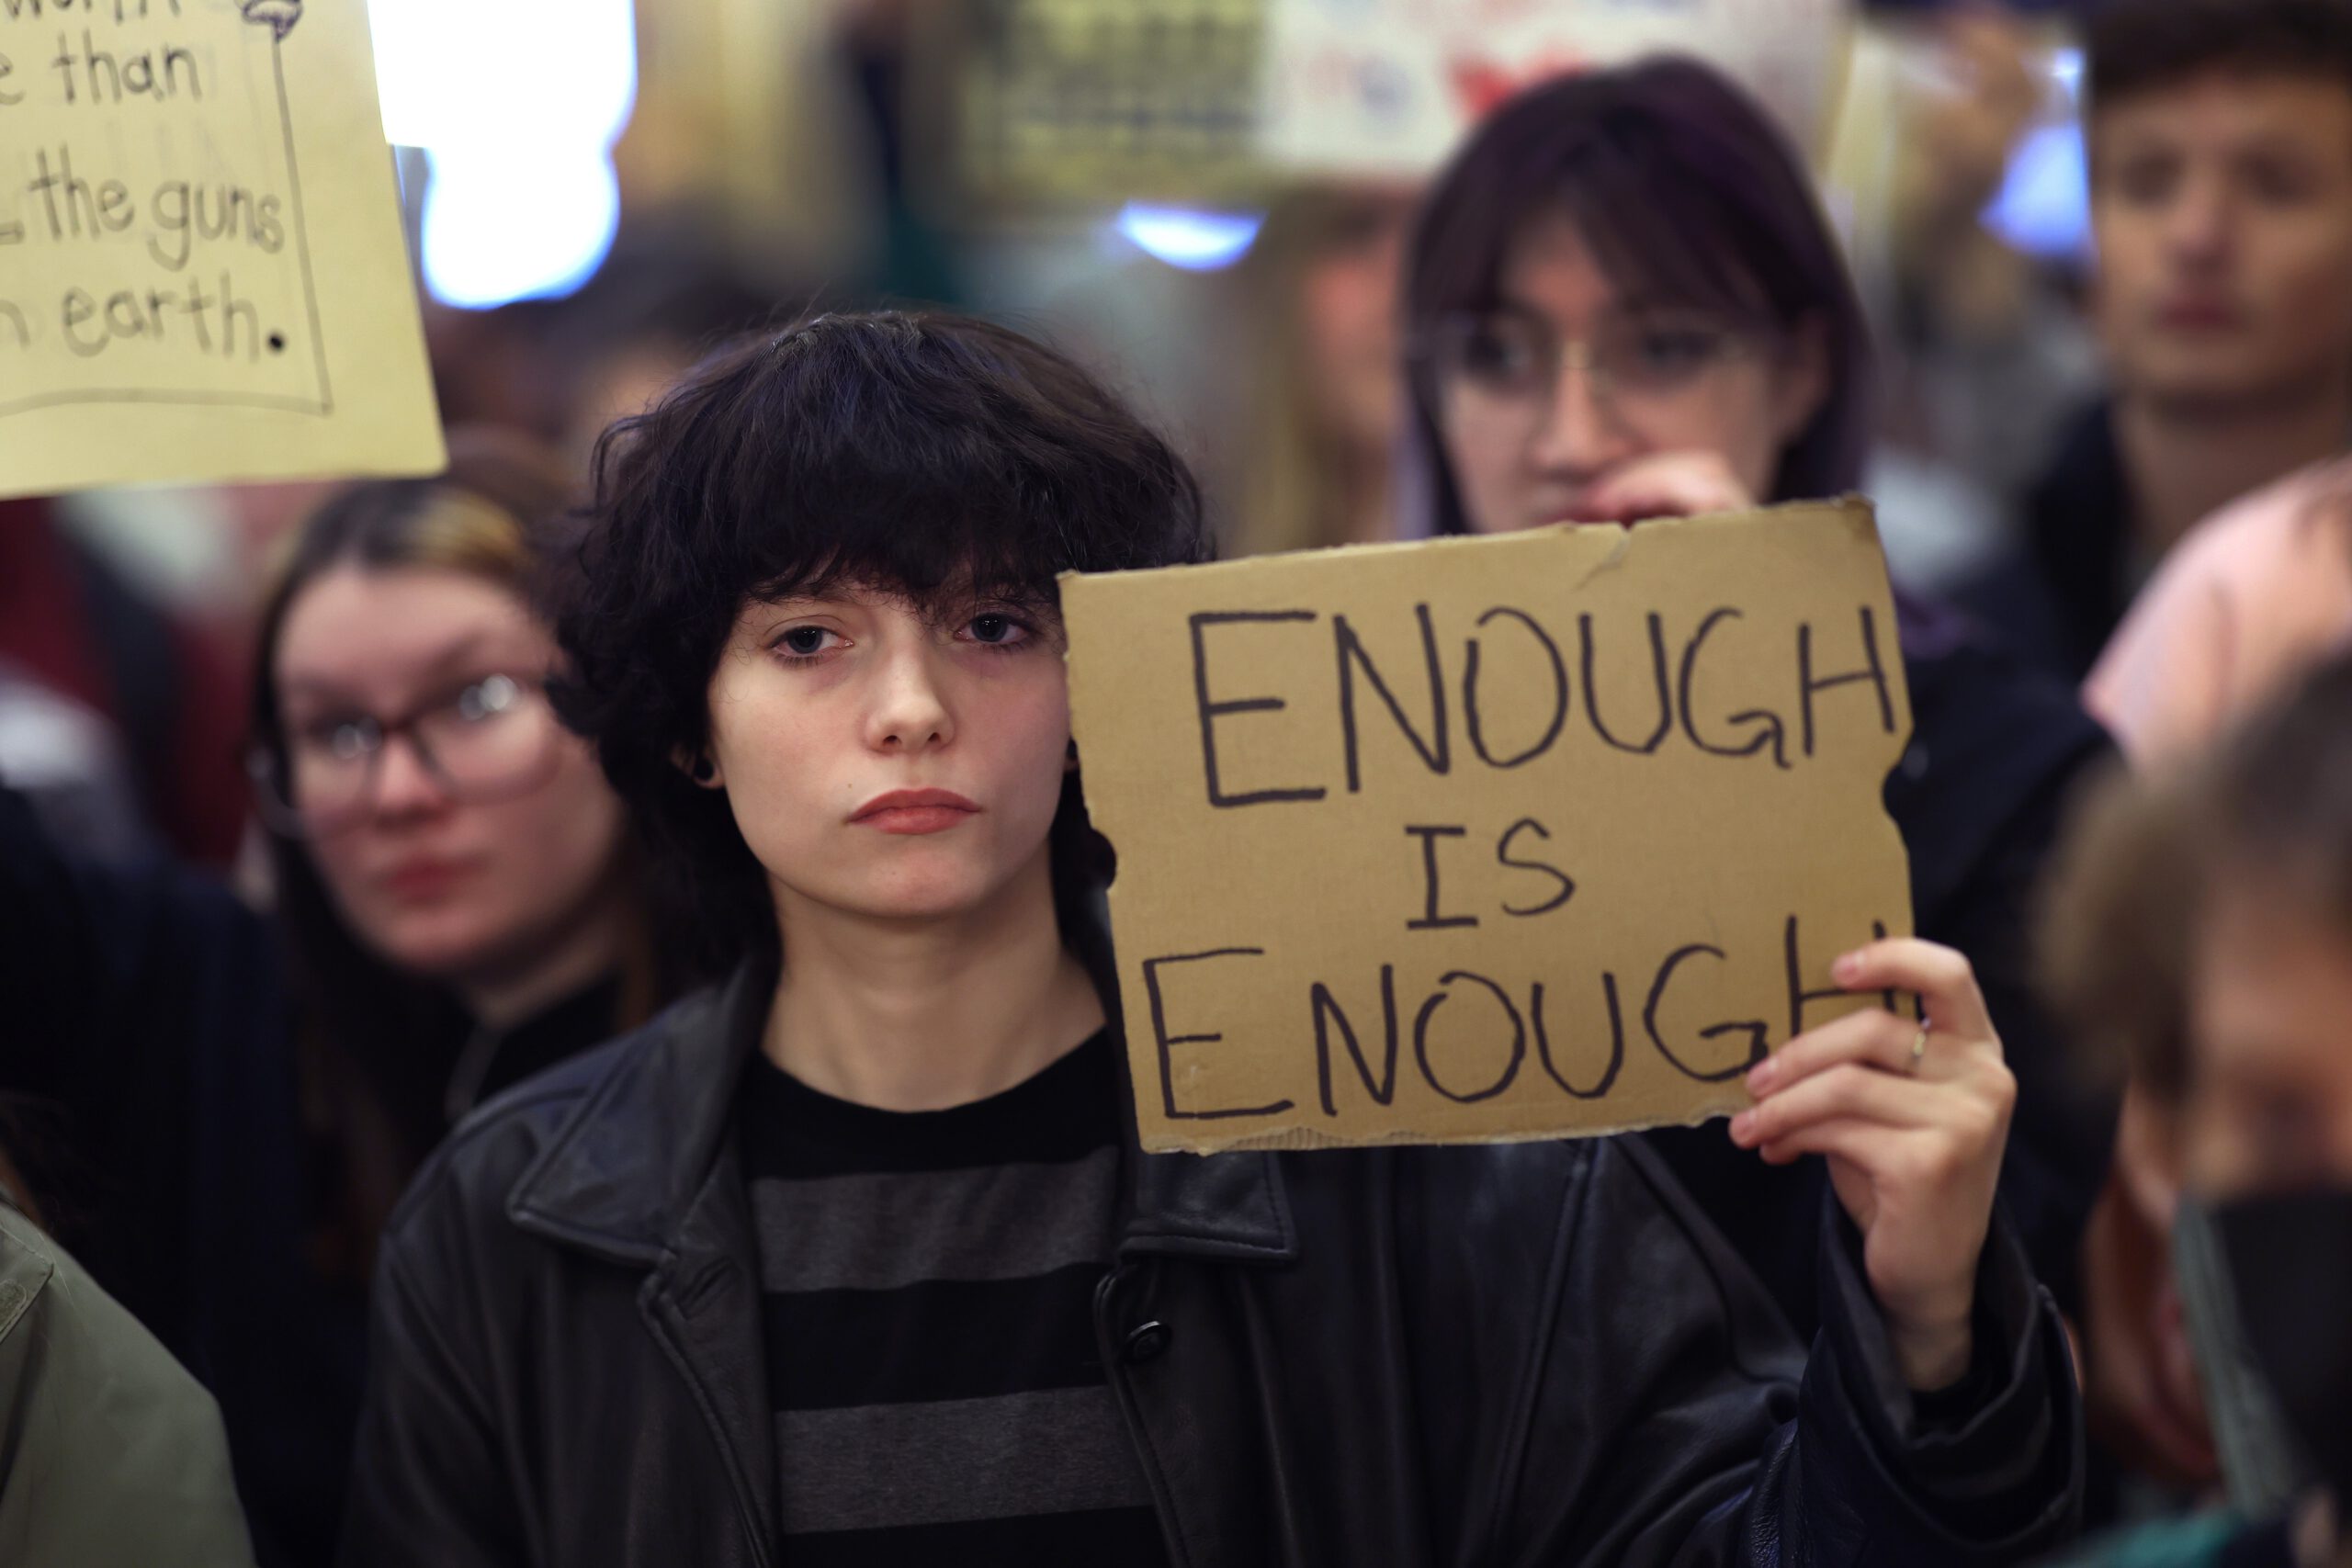 A young person holds up a cardboard sign that reads 